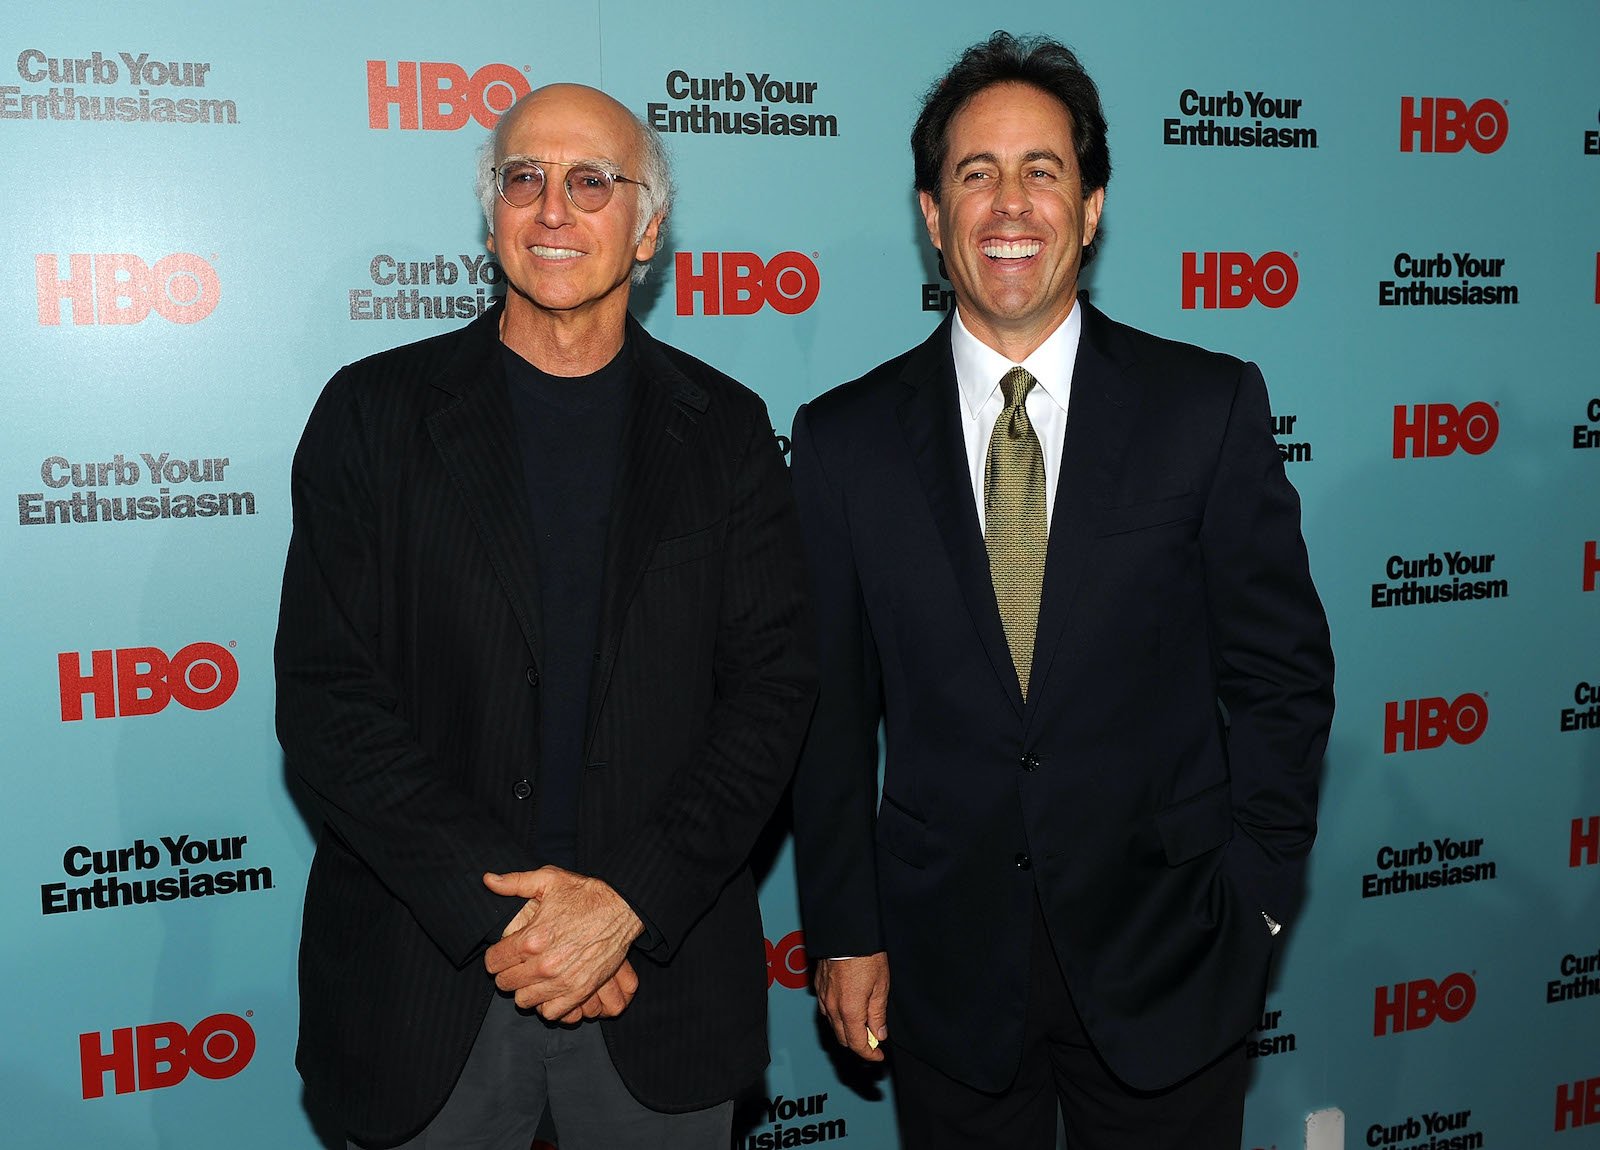 Larry David and Jerry Seinfeld walk the red carpet at the Curb Your Enthusiasm Screening Room in 2009